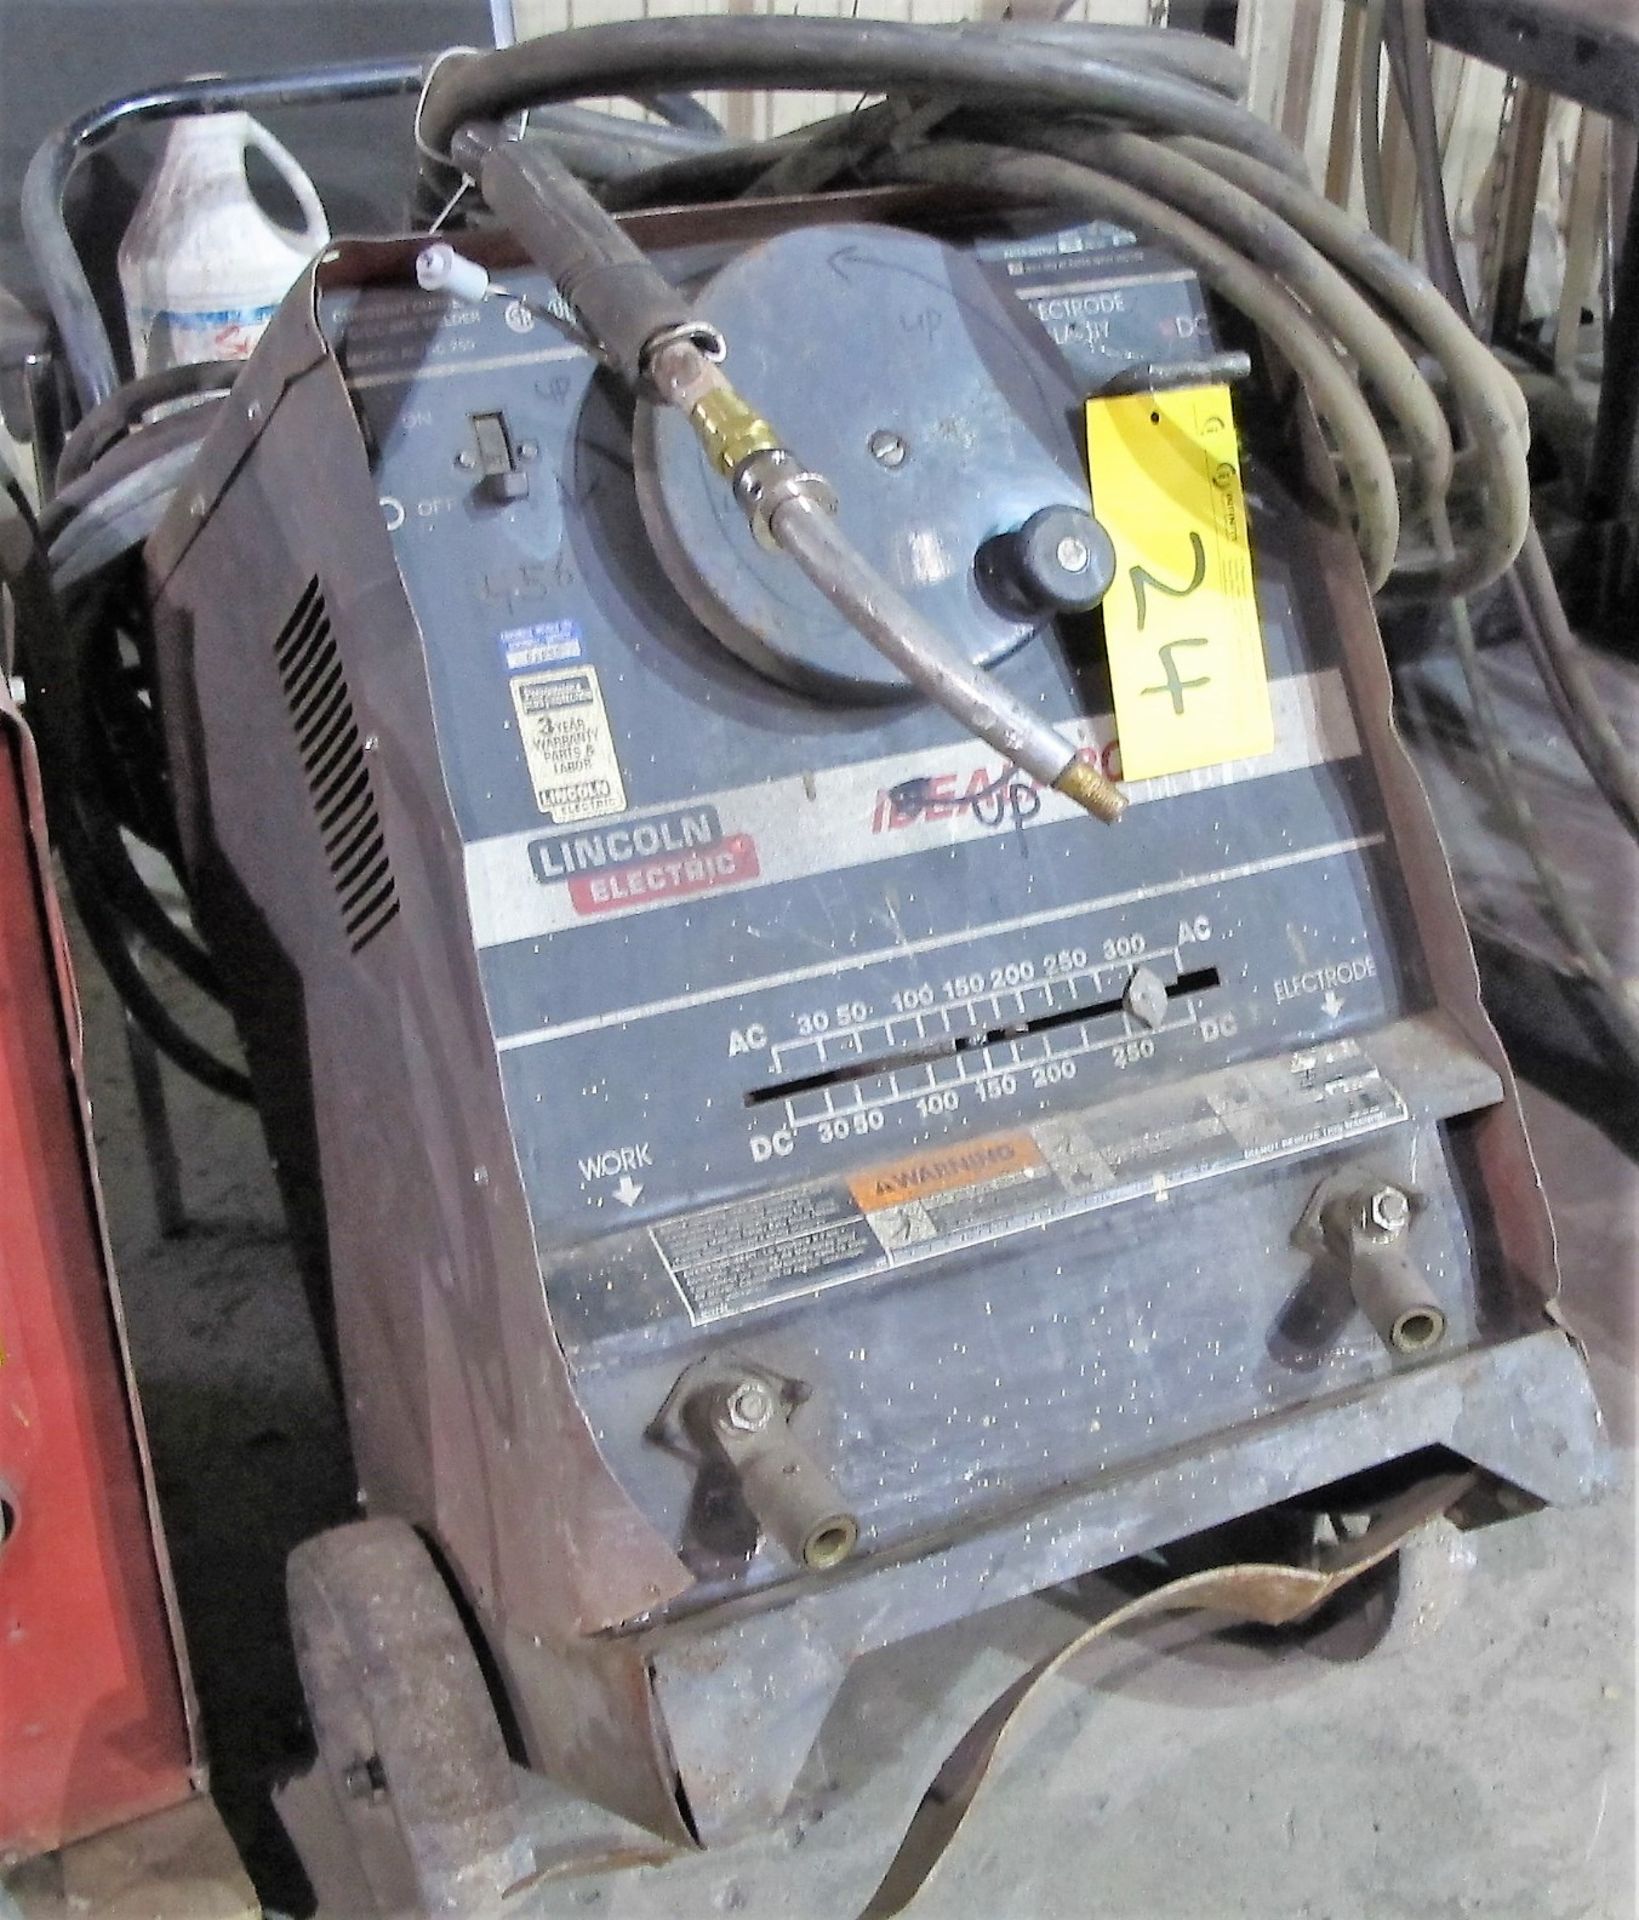 LINCOLN ELECTRIC IDEALARCH 250 MIG WELDER W/ CABLES & CART - Image 2 of 3